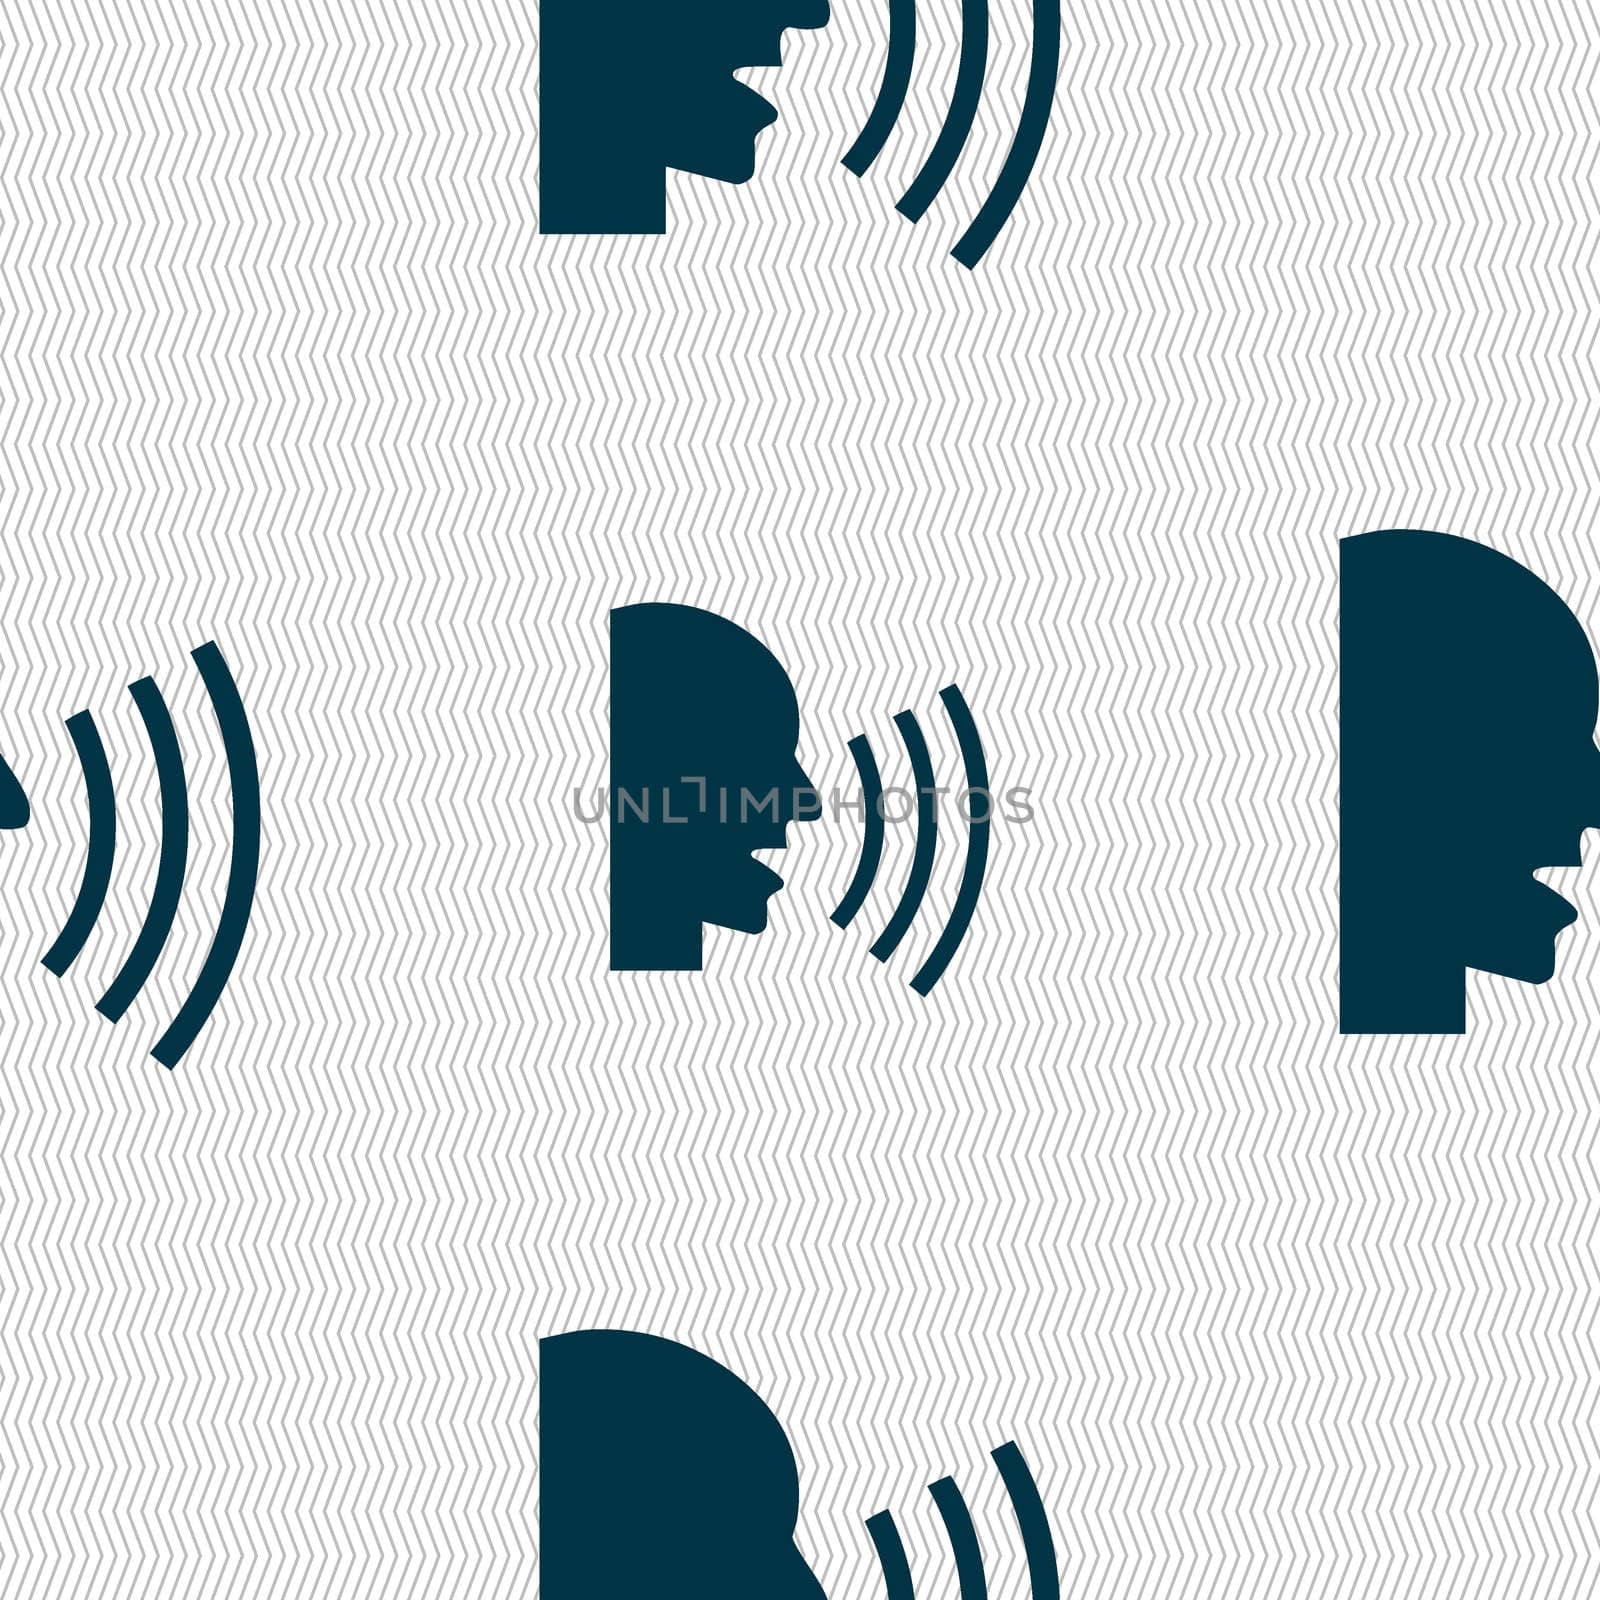 Talking Flat modern web icon. Seamless abstract background with geometric shapes. illustration